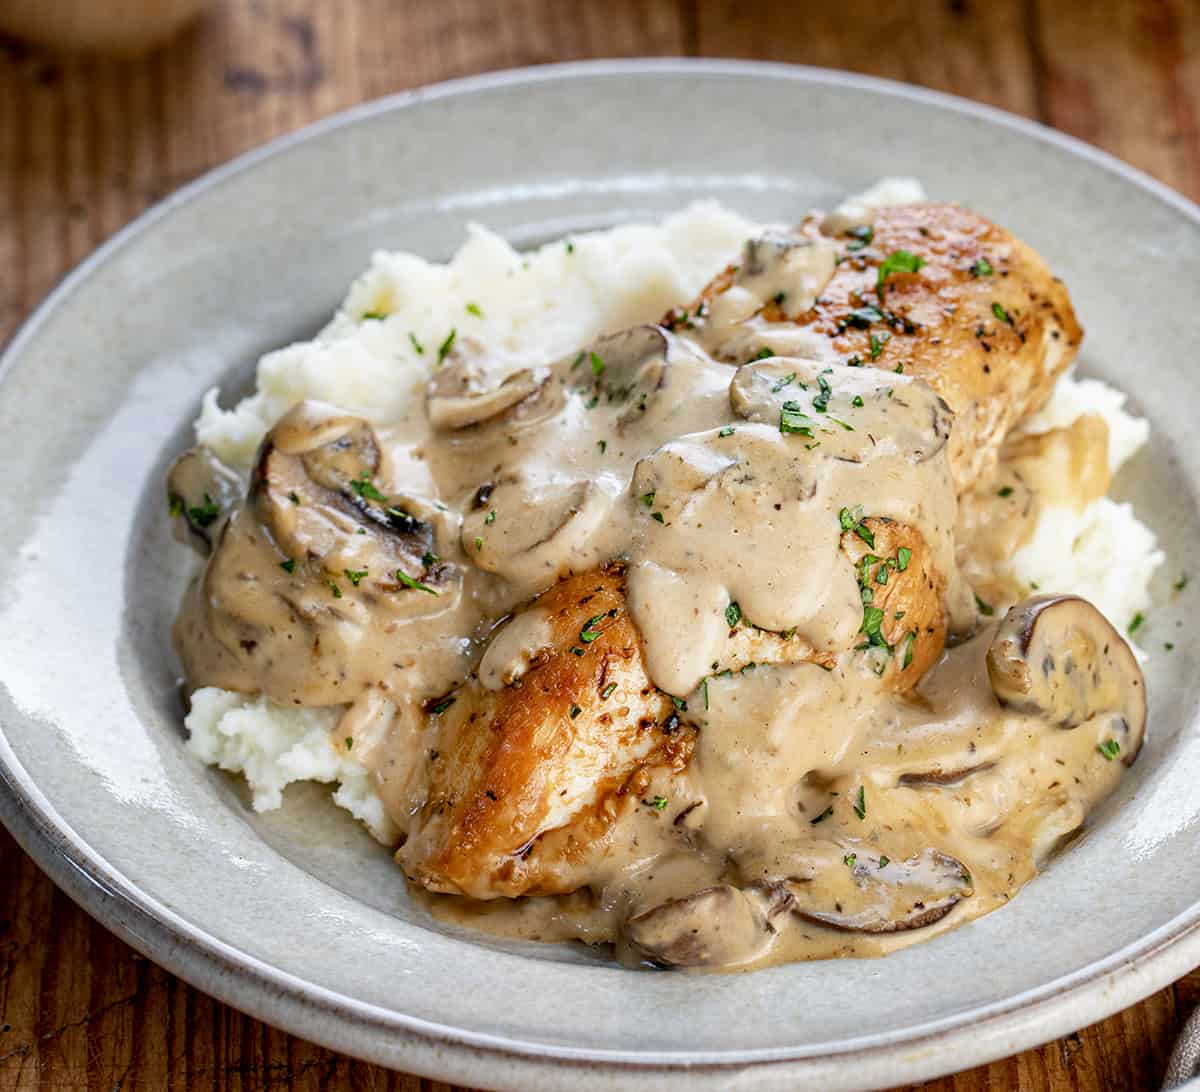 Plate of Chicken Breast Smothered in Mushroom Sauce over Mashed Potatoes.